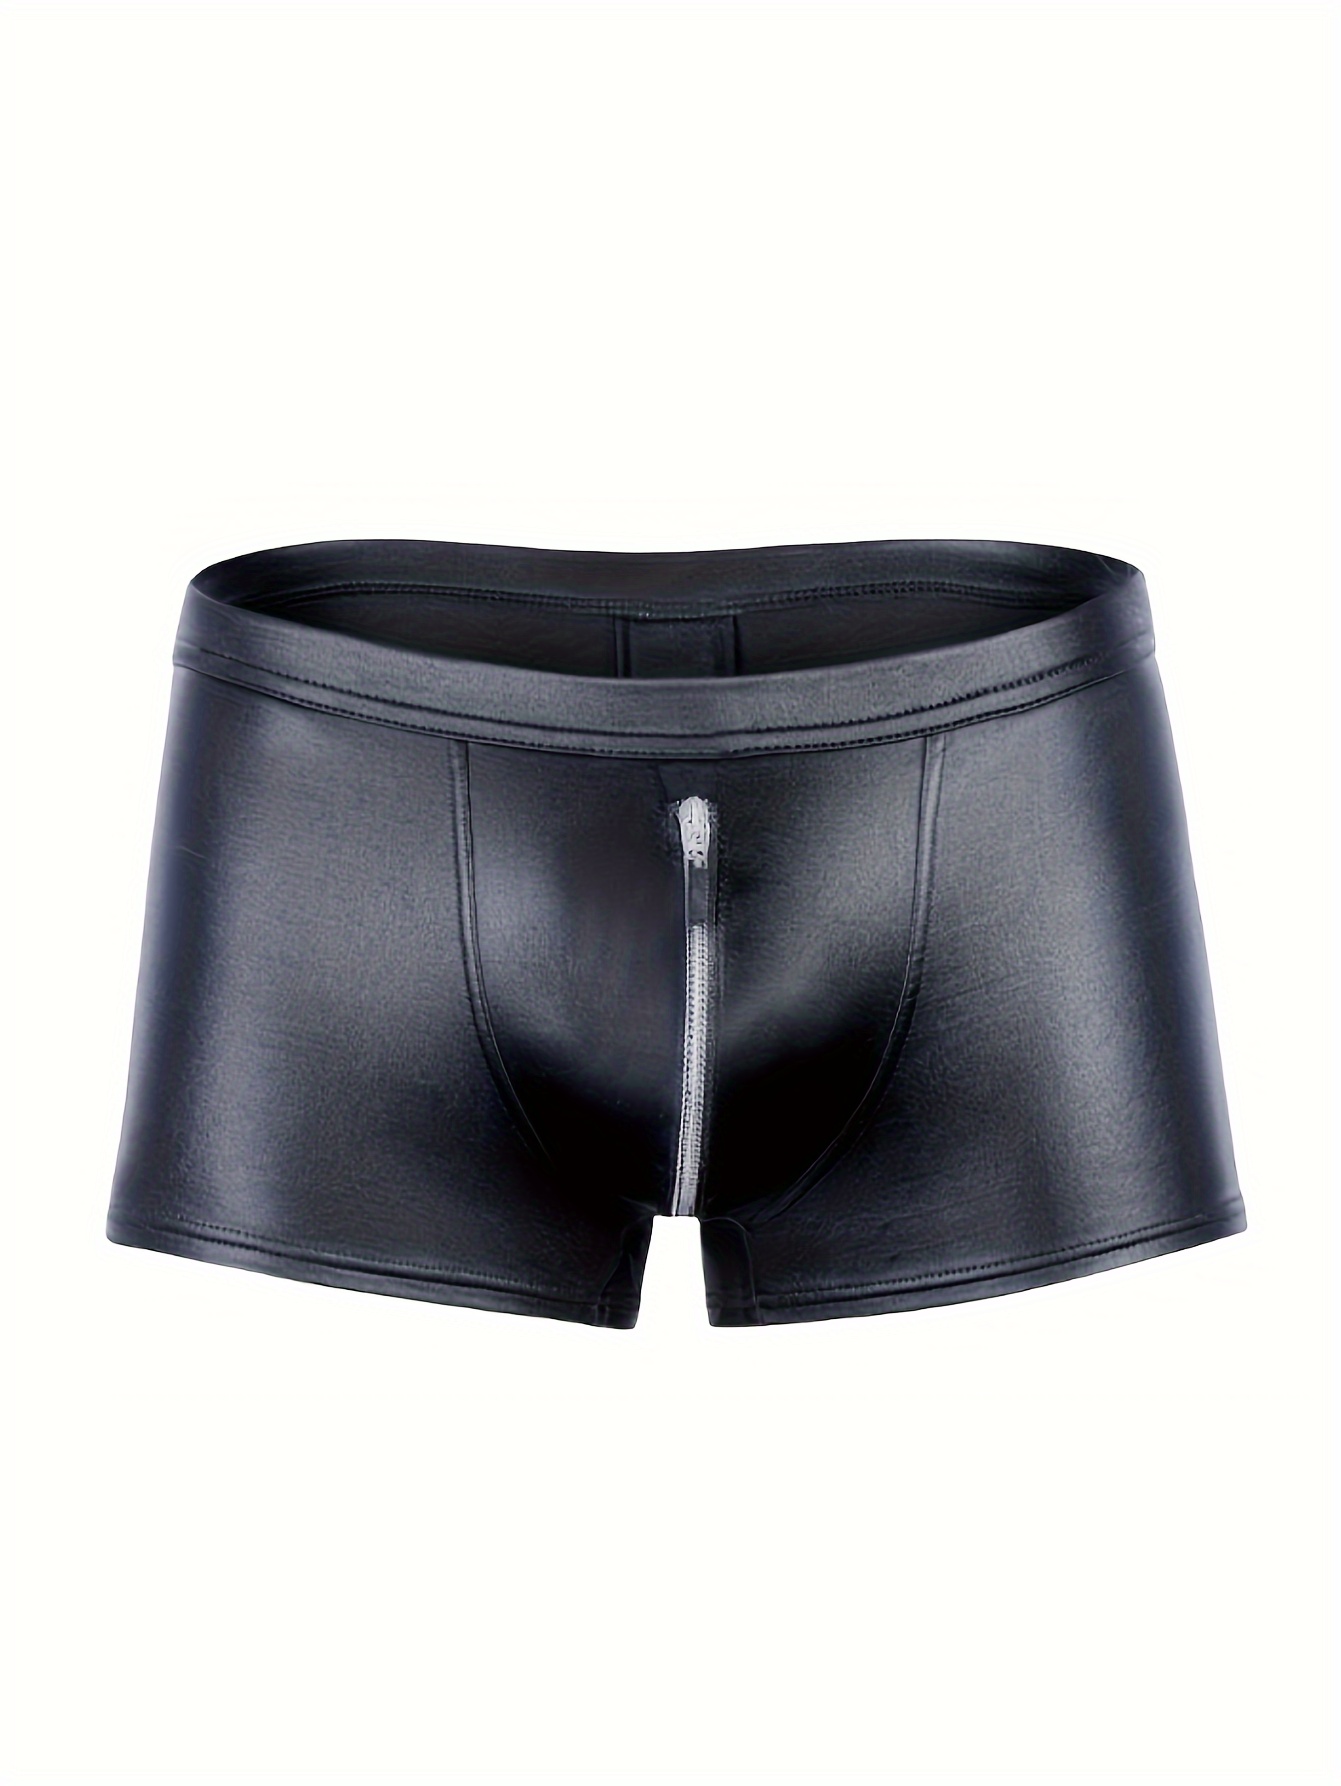 Zerlibeaful Mens Briefs Bulk Leather Big Bag Men's Underwear Boxer Men's Briefs  Briefs Underwear Sexy Men's Knockers (Black, XXL) : : Clothing,  Shoes & Accessories